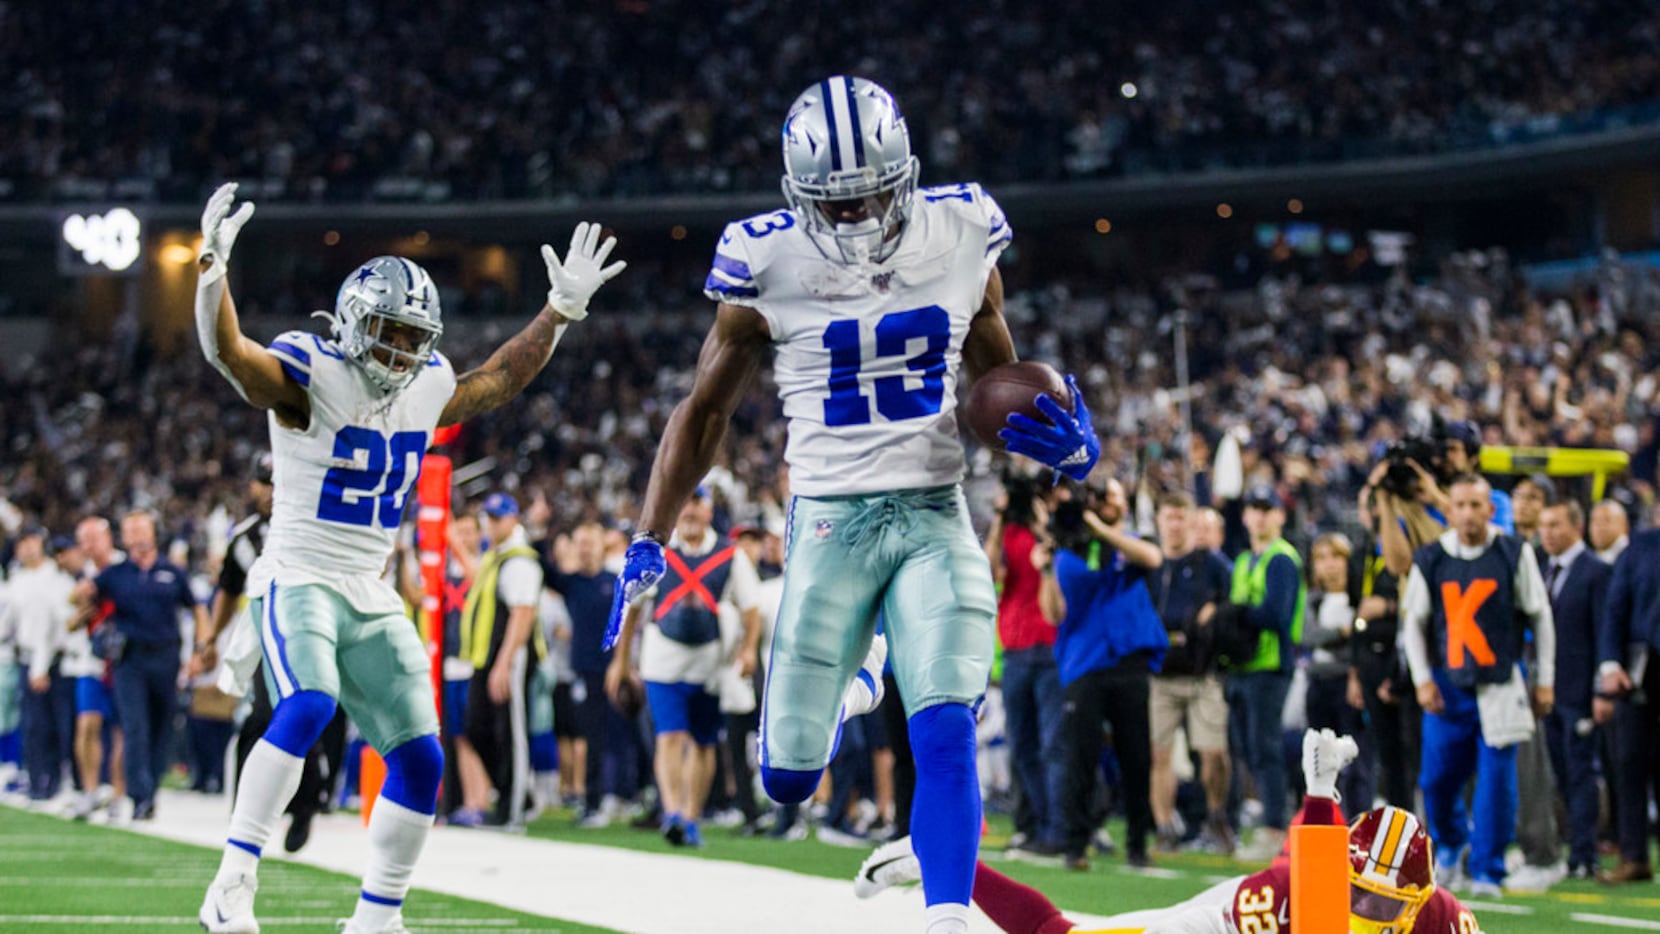 Film room: Four New Year's resolutions for the Dallas Cowboys in 2020